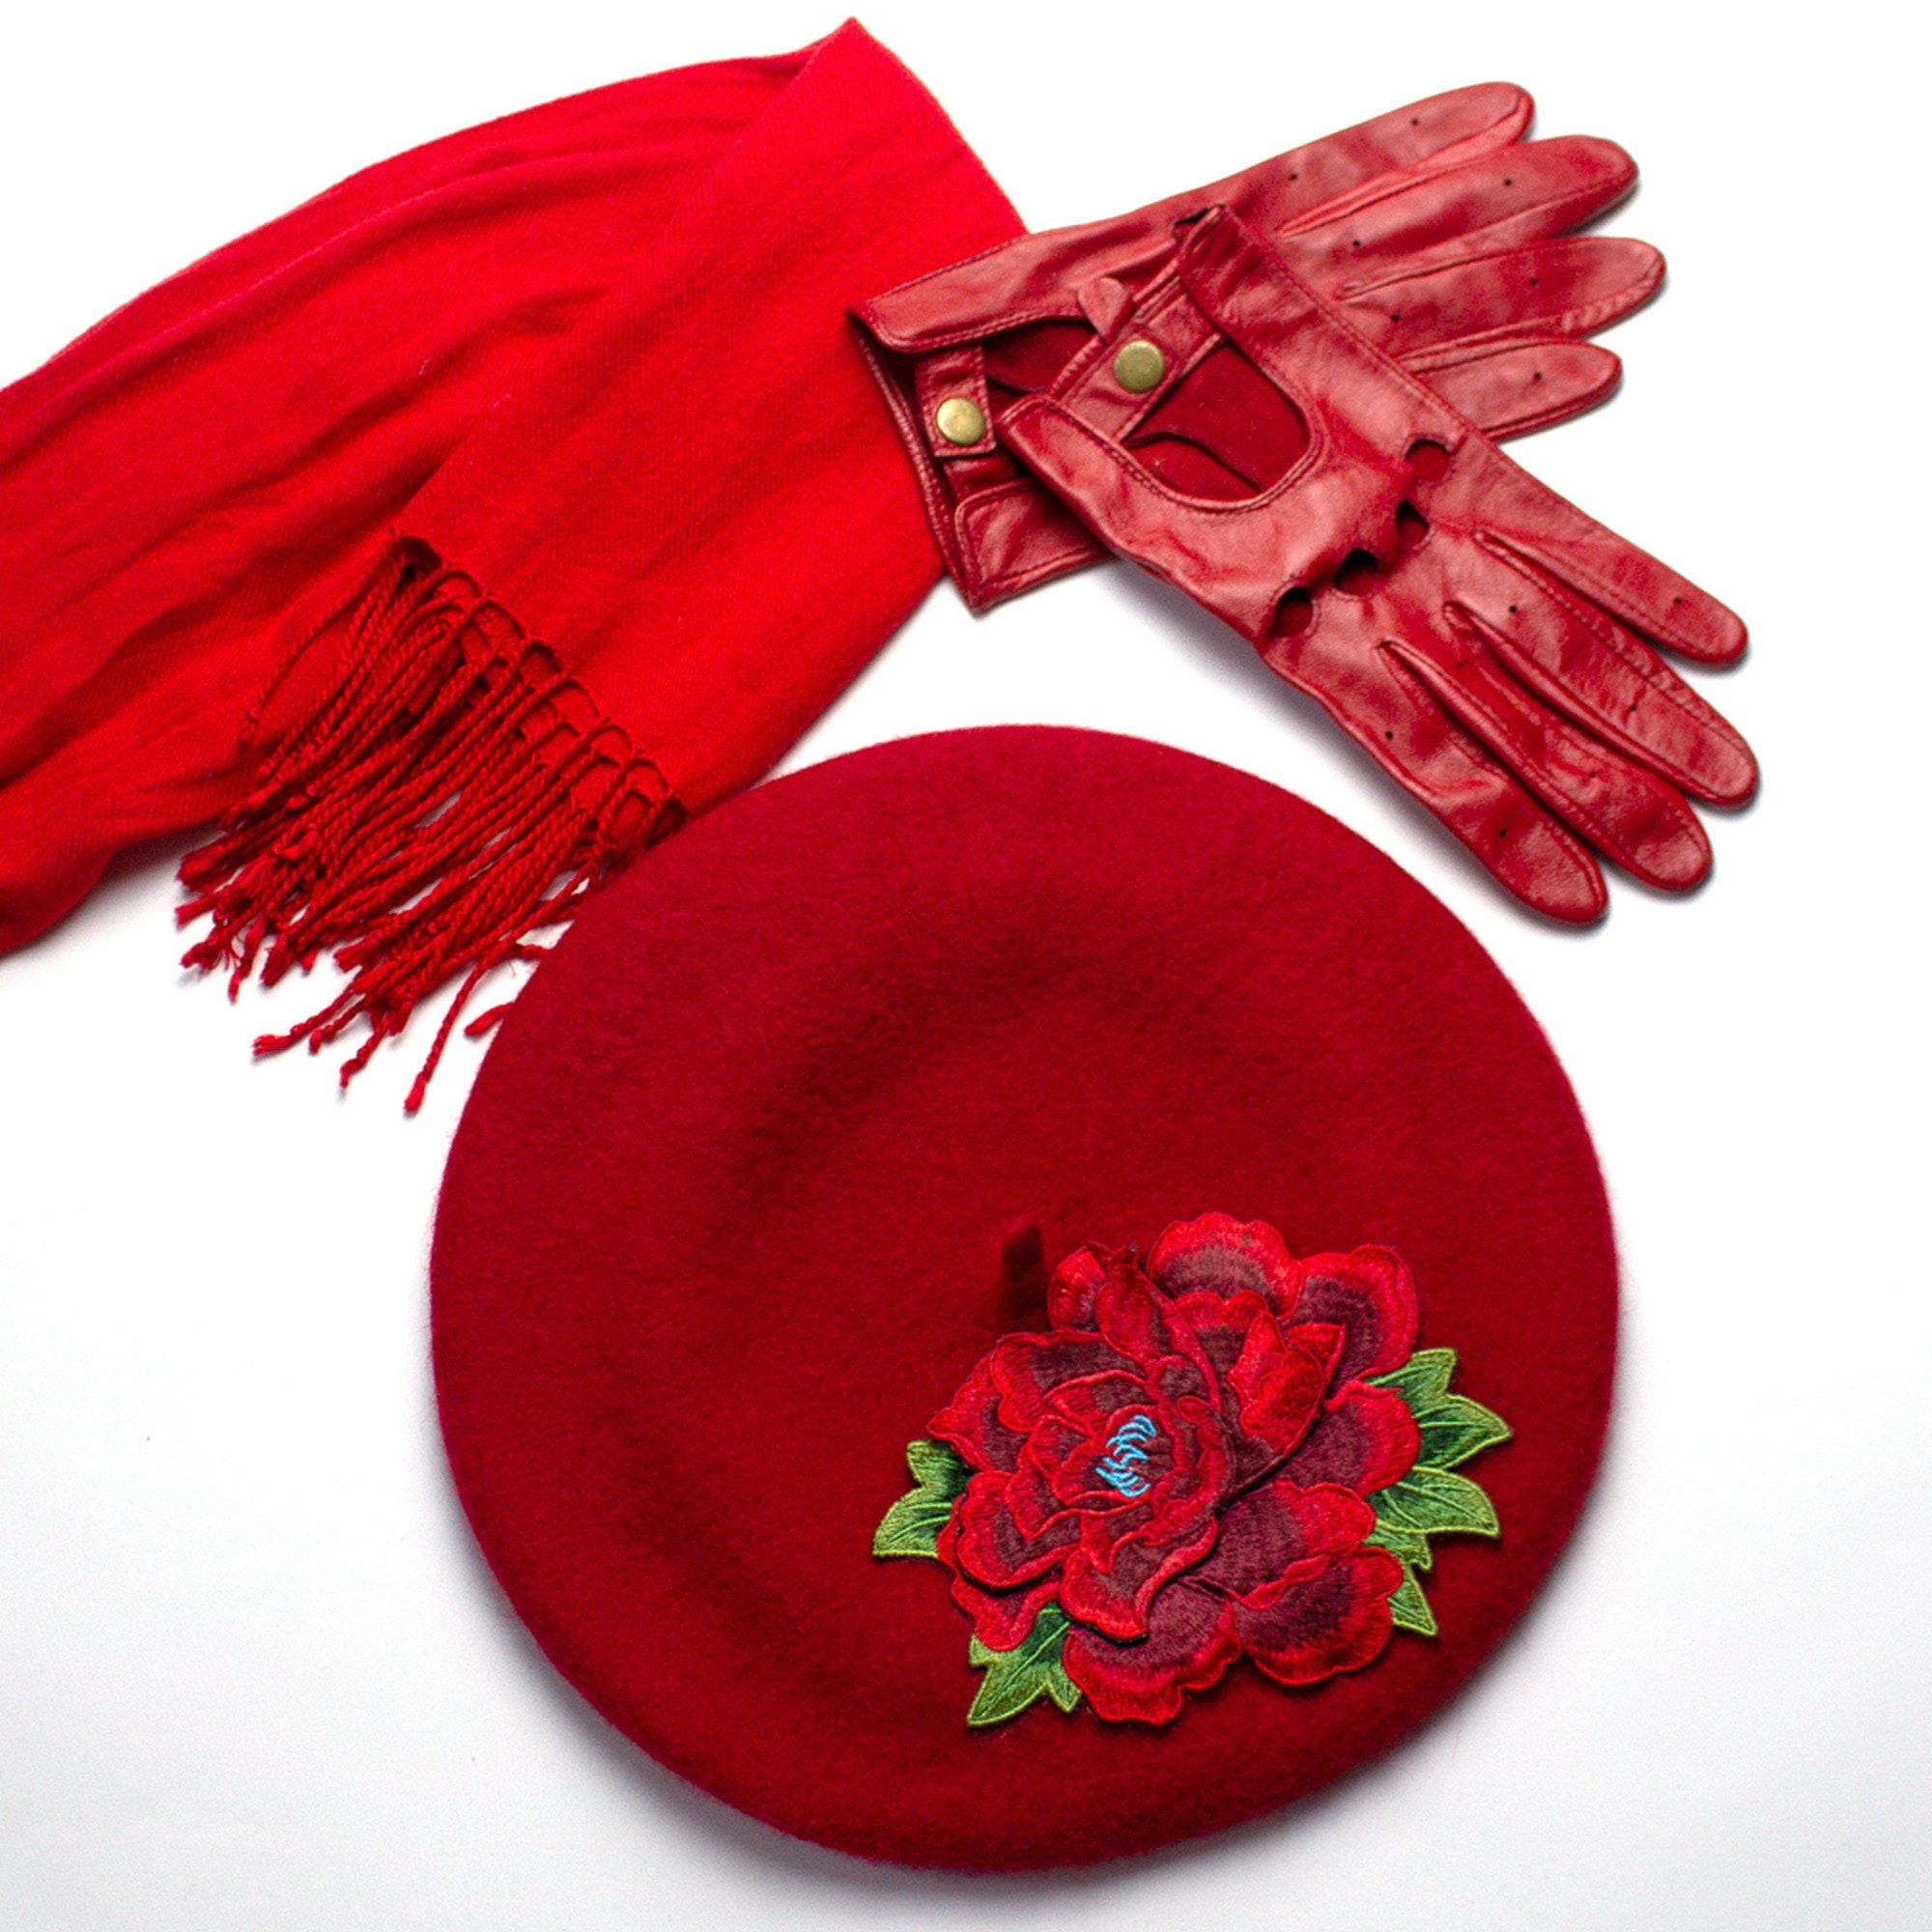 Red Beret Hat With Large Embroidery Flower, Wool Felt Hat, French Women’s Winter